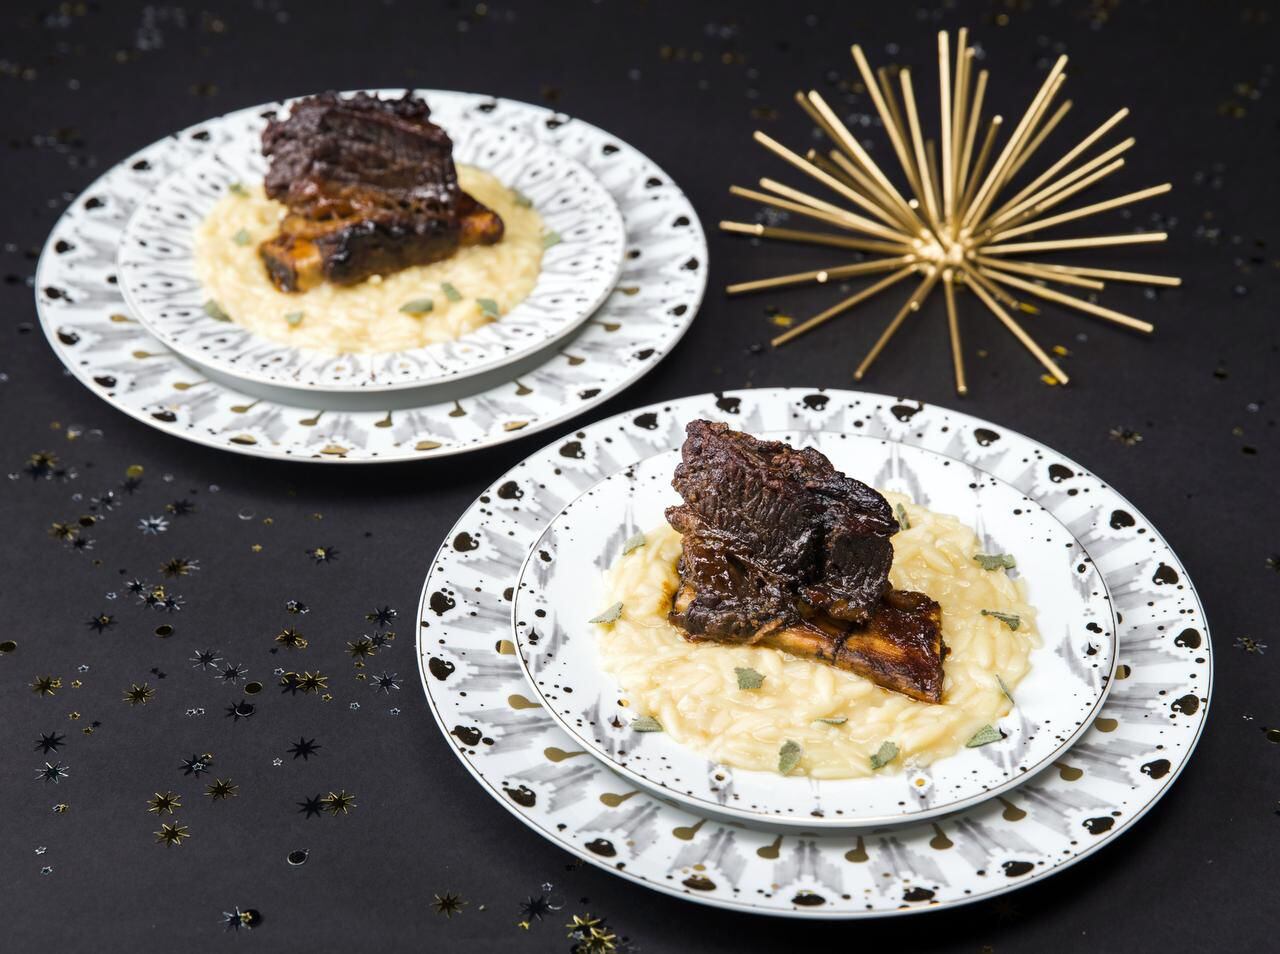 
Beer braised short ribs with smoked gouda risotto
